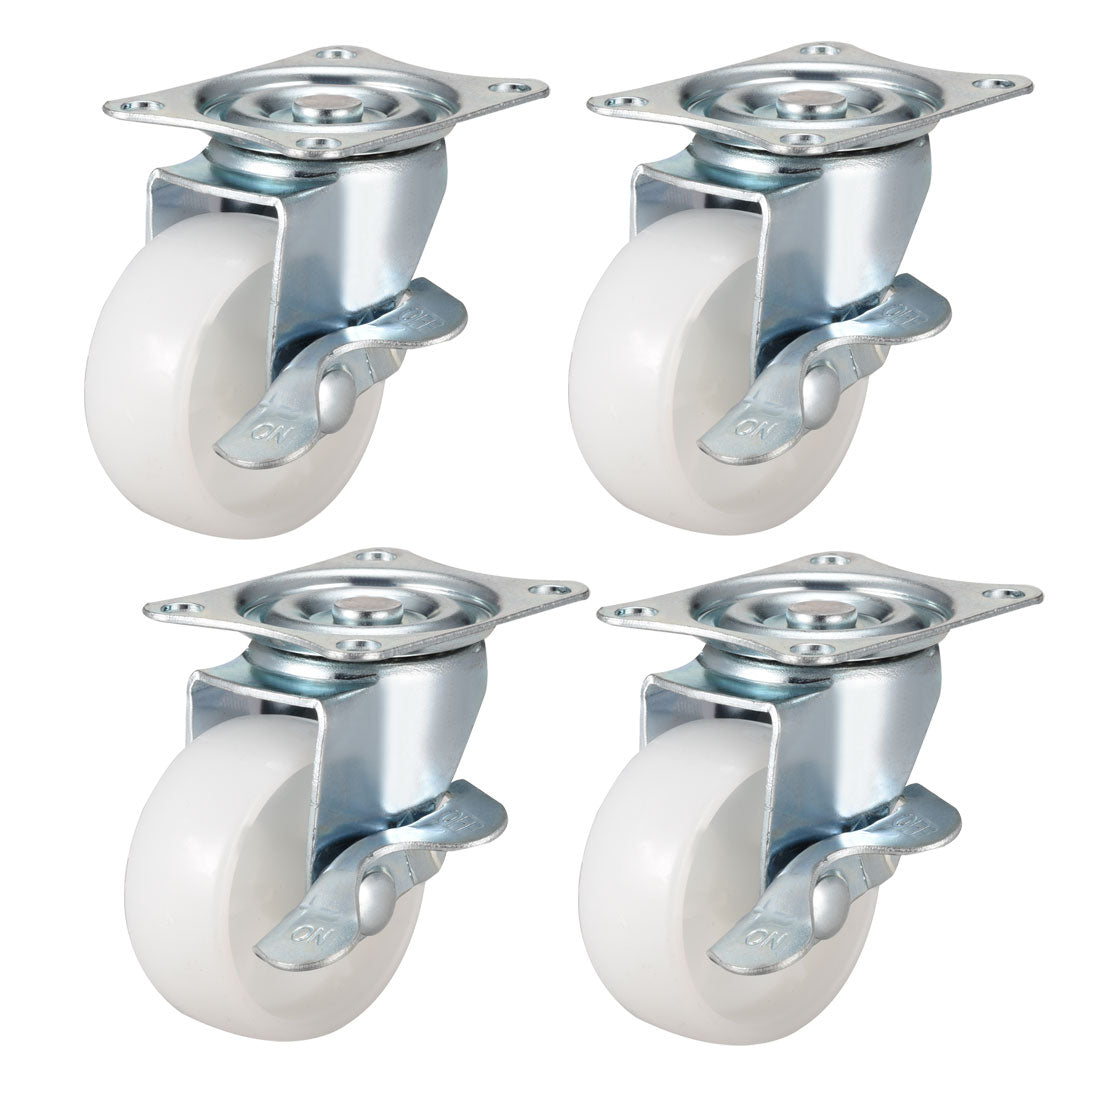 Uxcell Uxcell 2 Inch Swivel Caster Wheels PP 360 Degree Top Plate Mounted Caster Wheel with Brake 66lb Capacity 4 Pcs